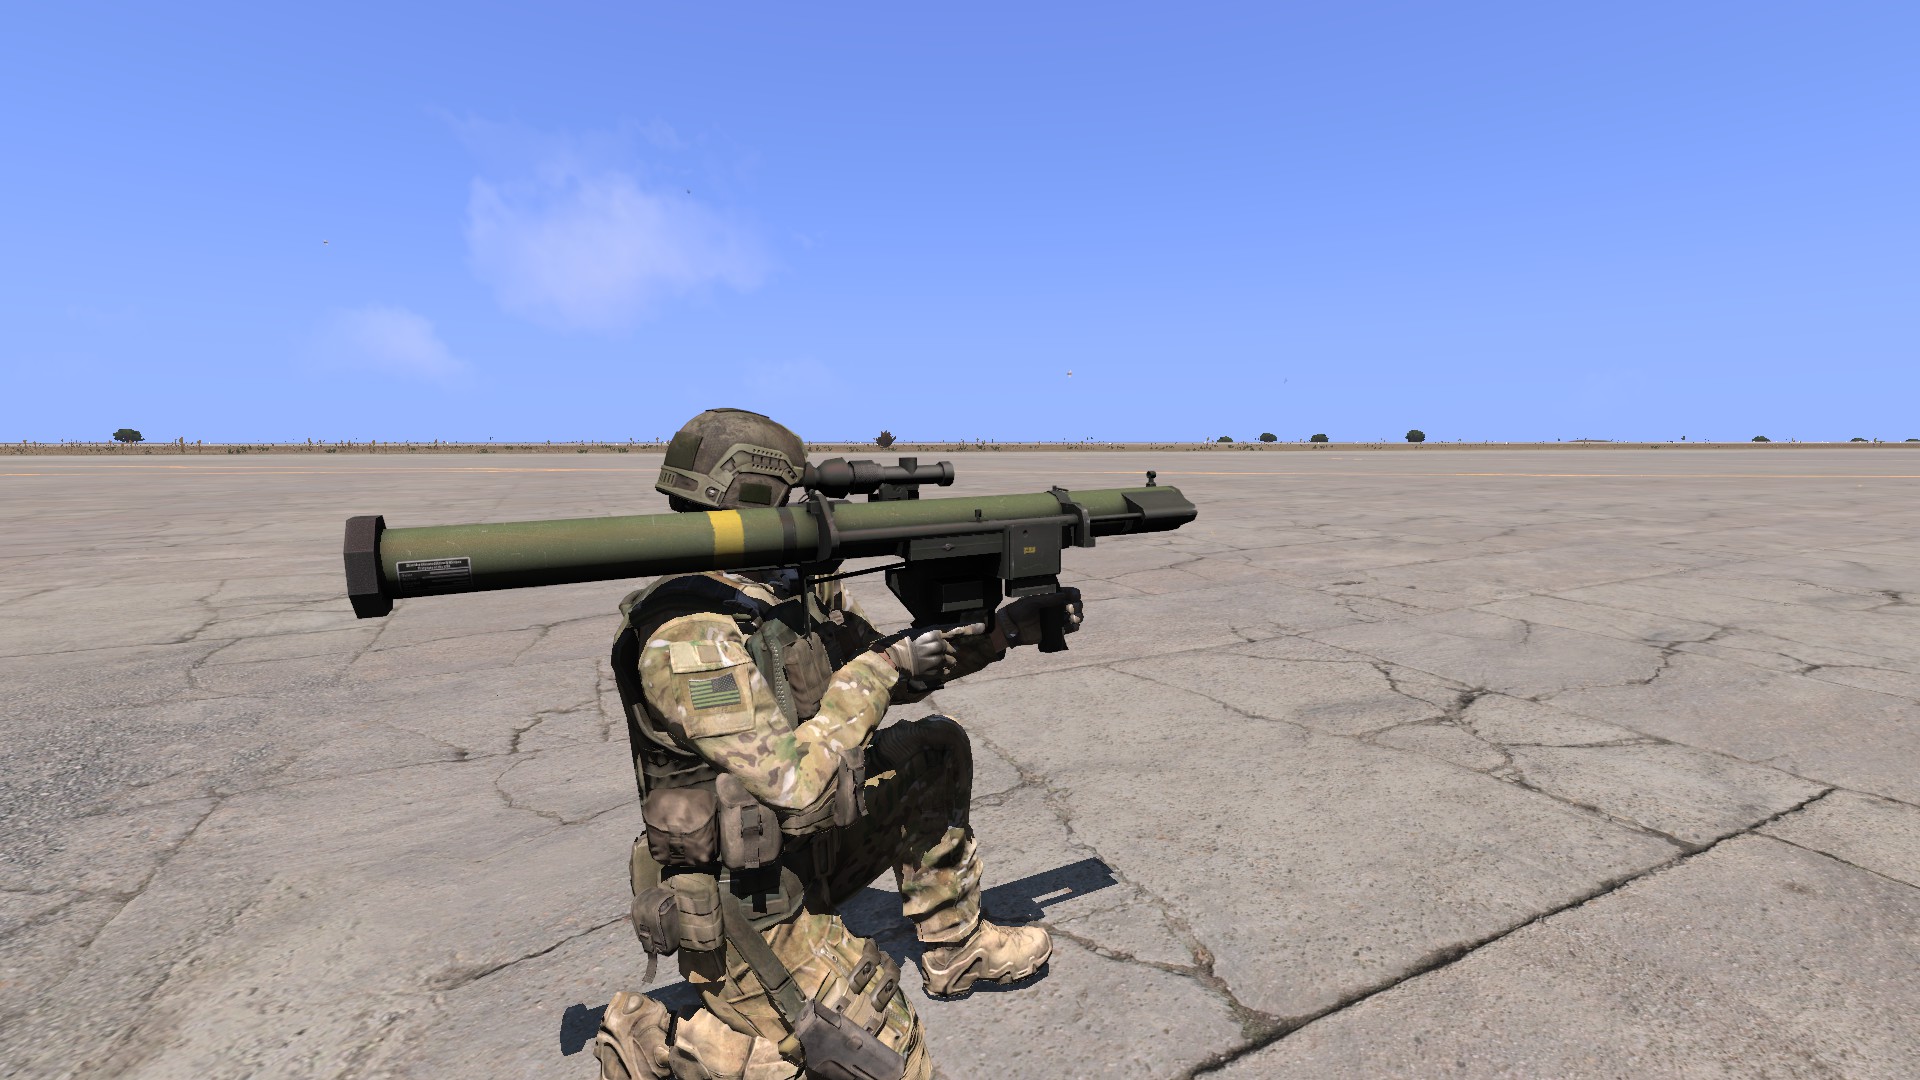 A3Launcher  Easy to use launcher for ARMA 3